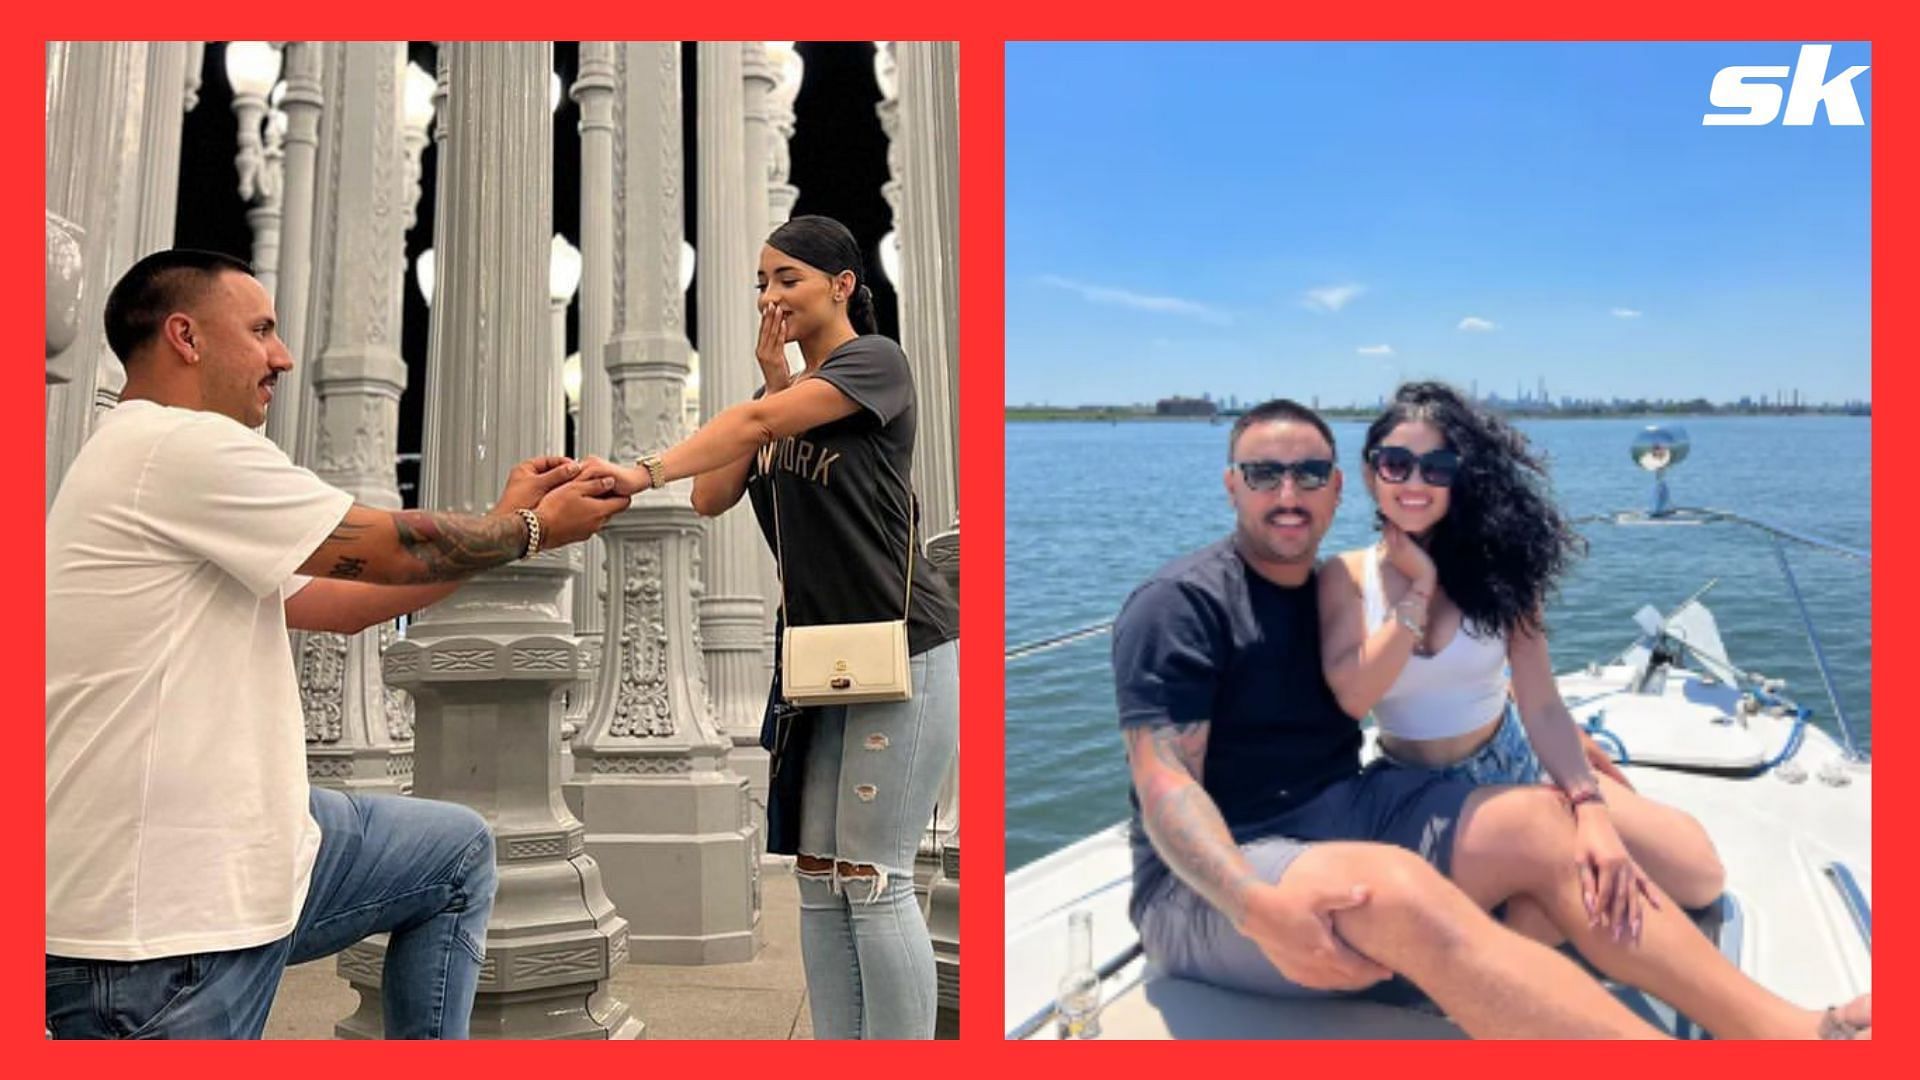 Yankees' Nestor Cortes Proposed to GF Alondra Esteras Russy After